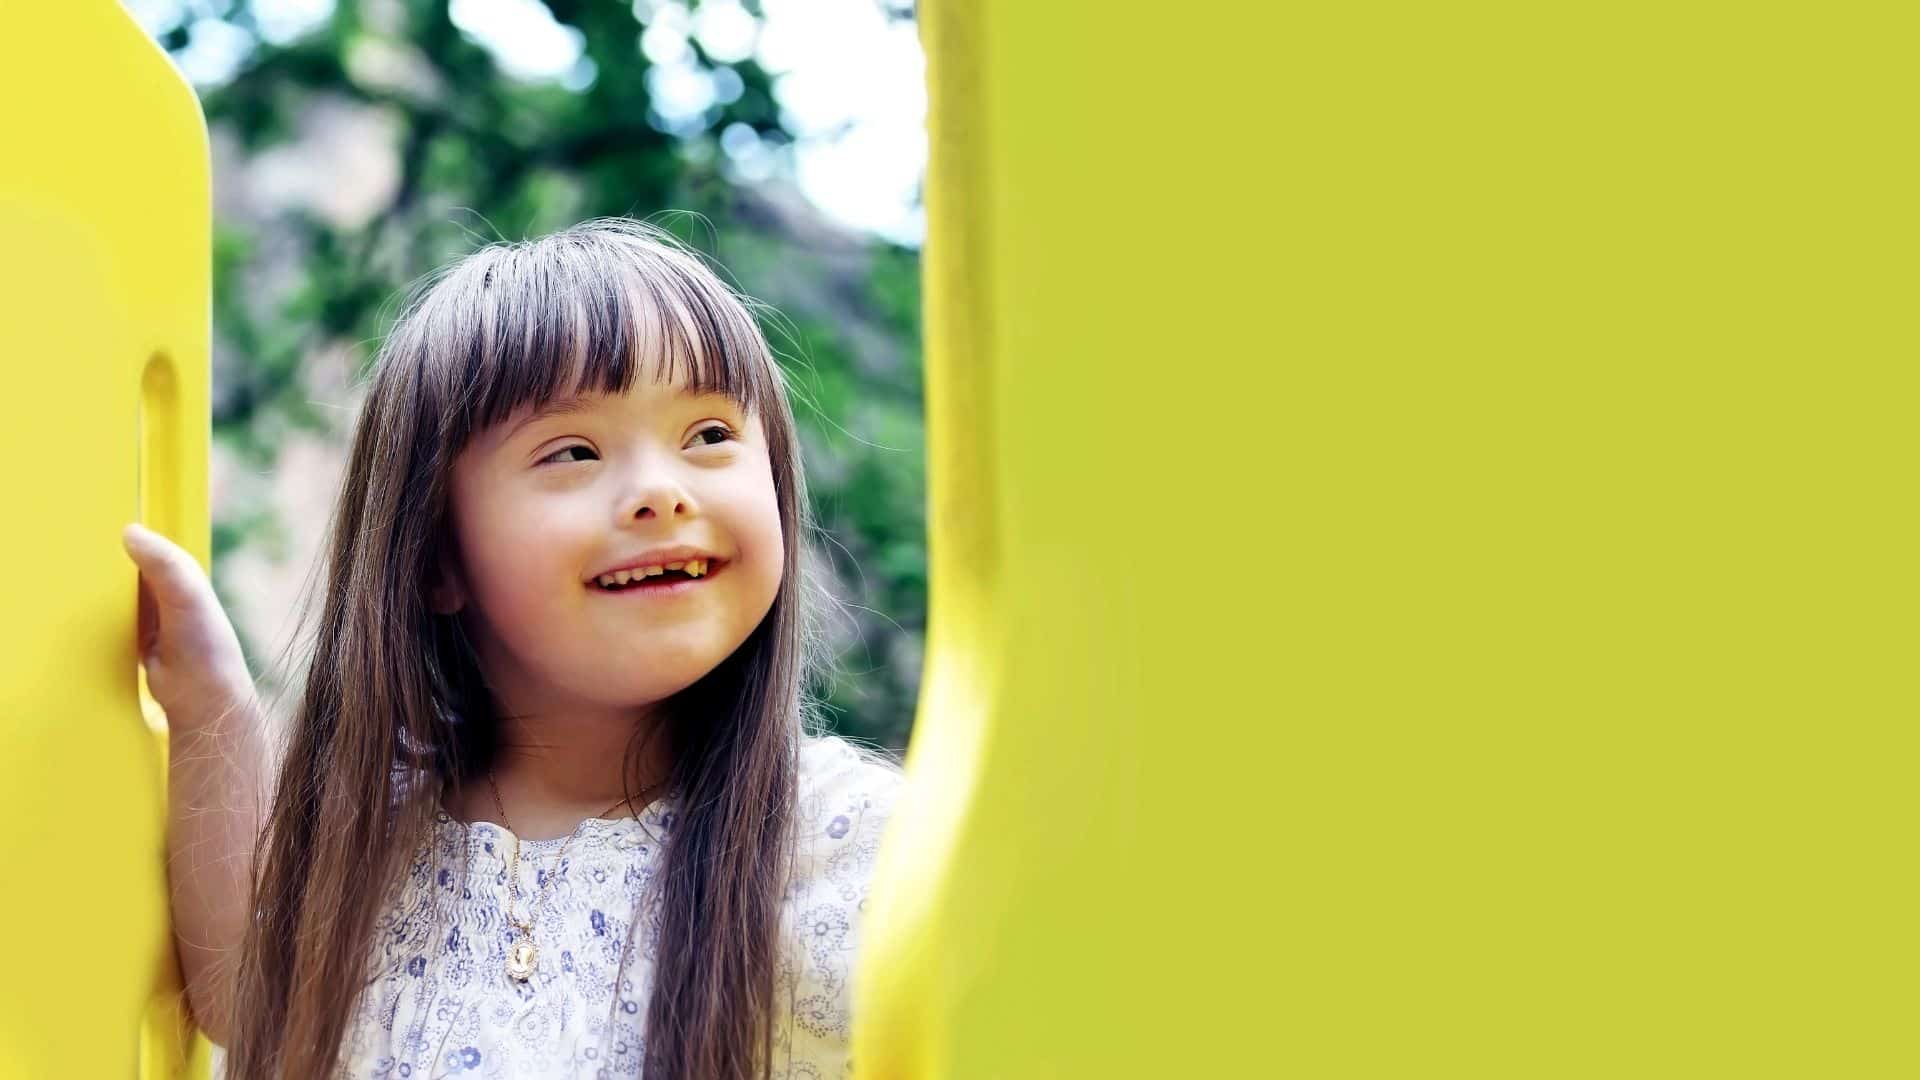 A little girl peering inbetween two lime green panels at a playground